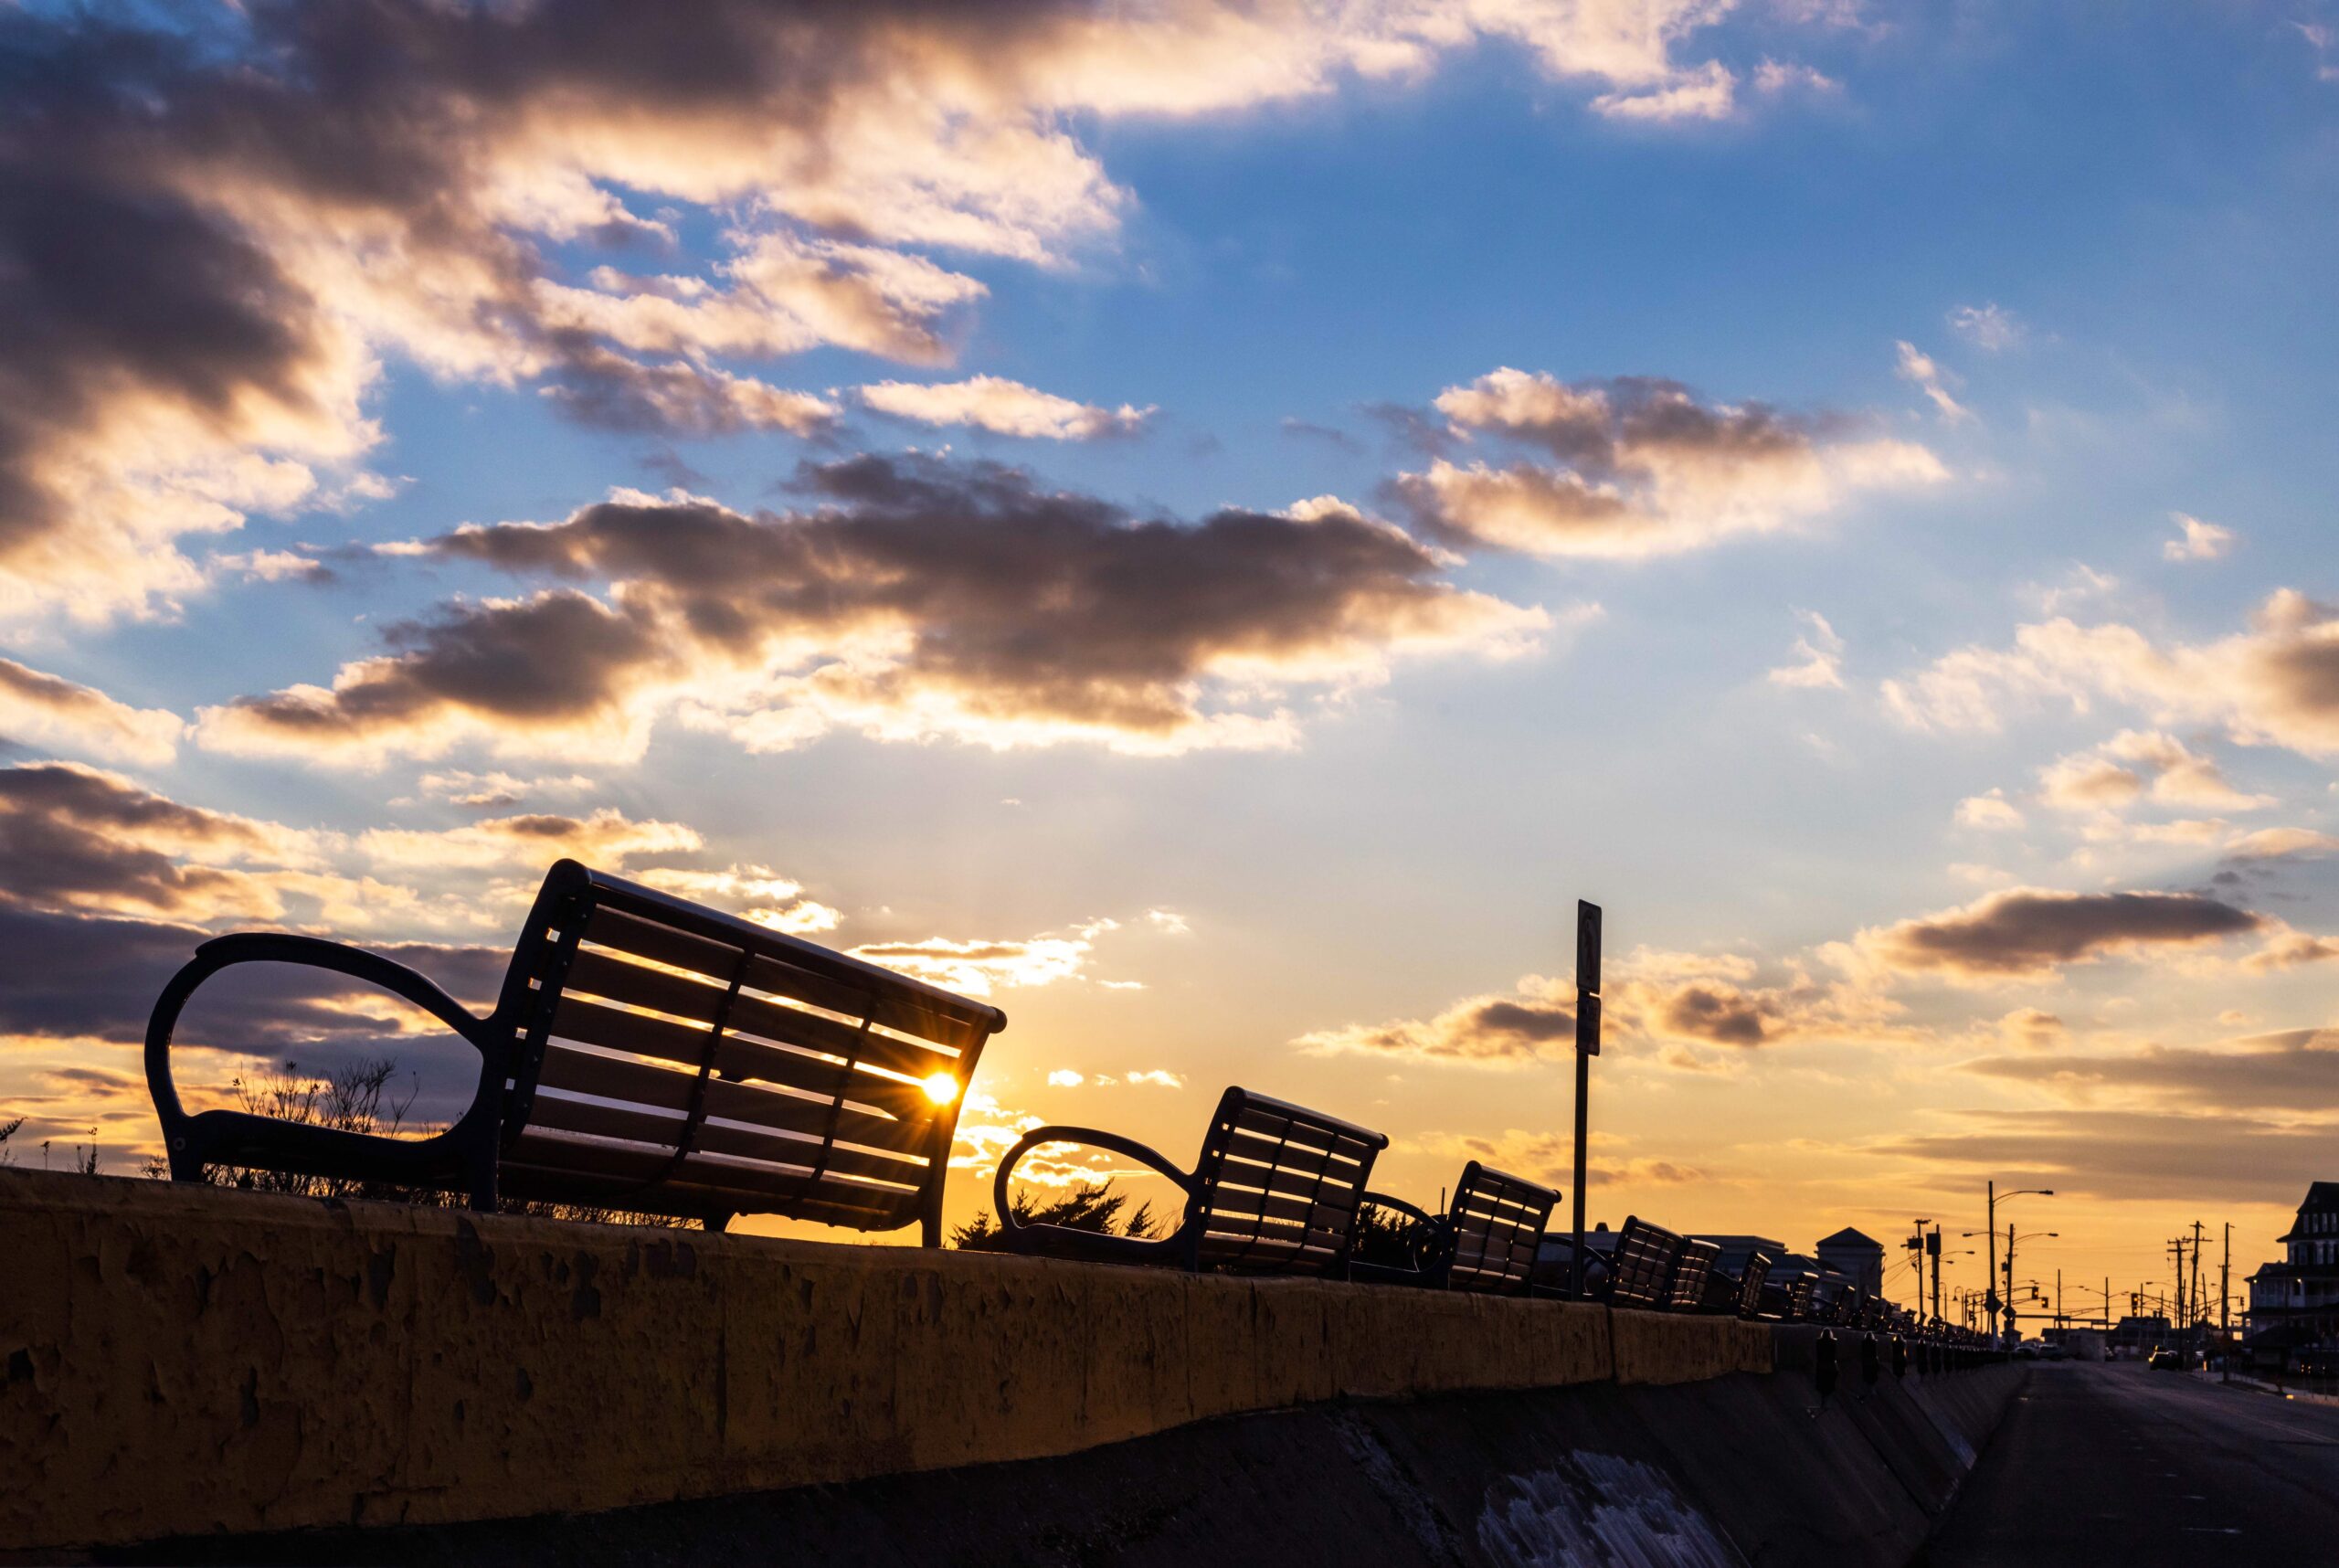 Sun setting behind a bench on the promenade with some puffy clouds in the sky